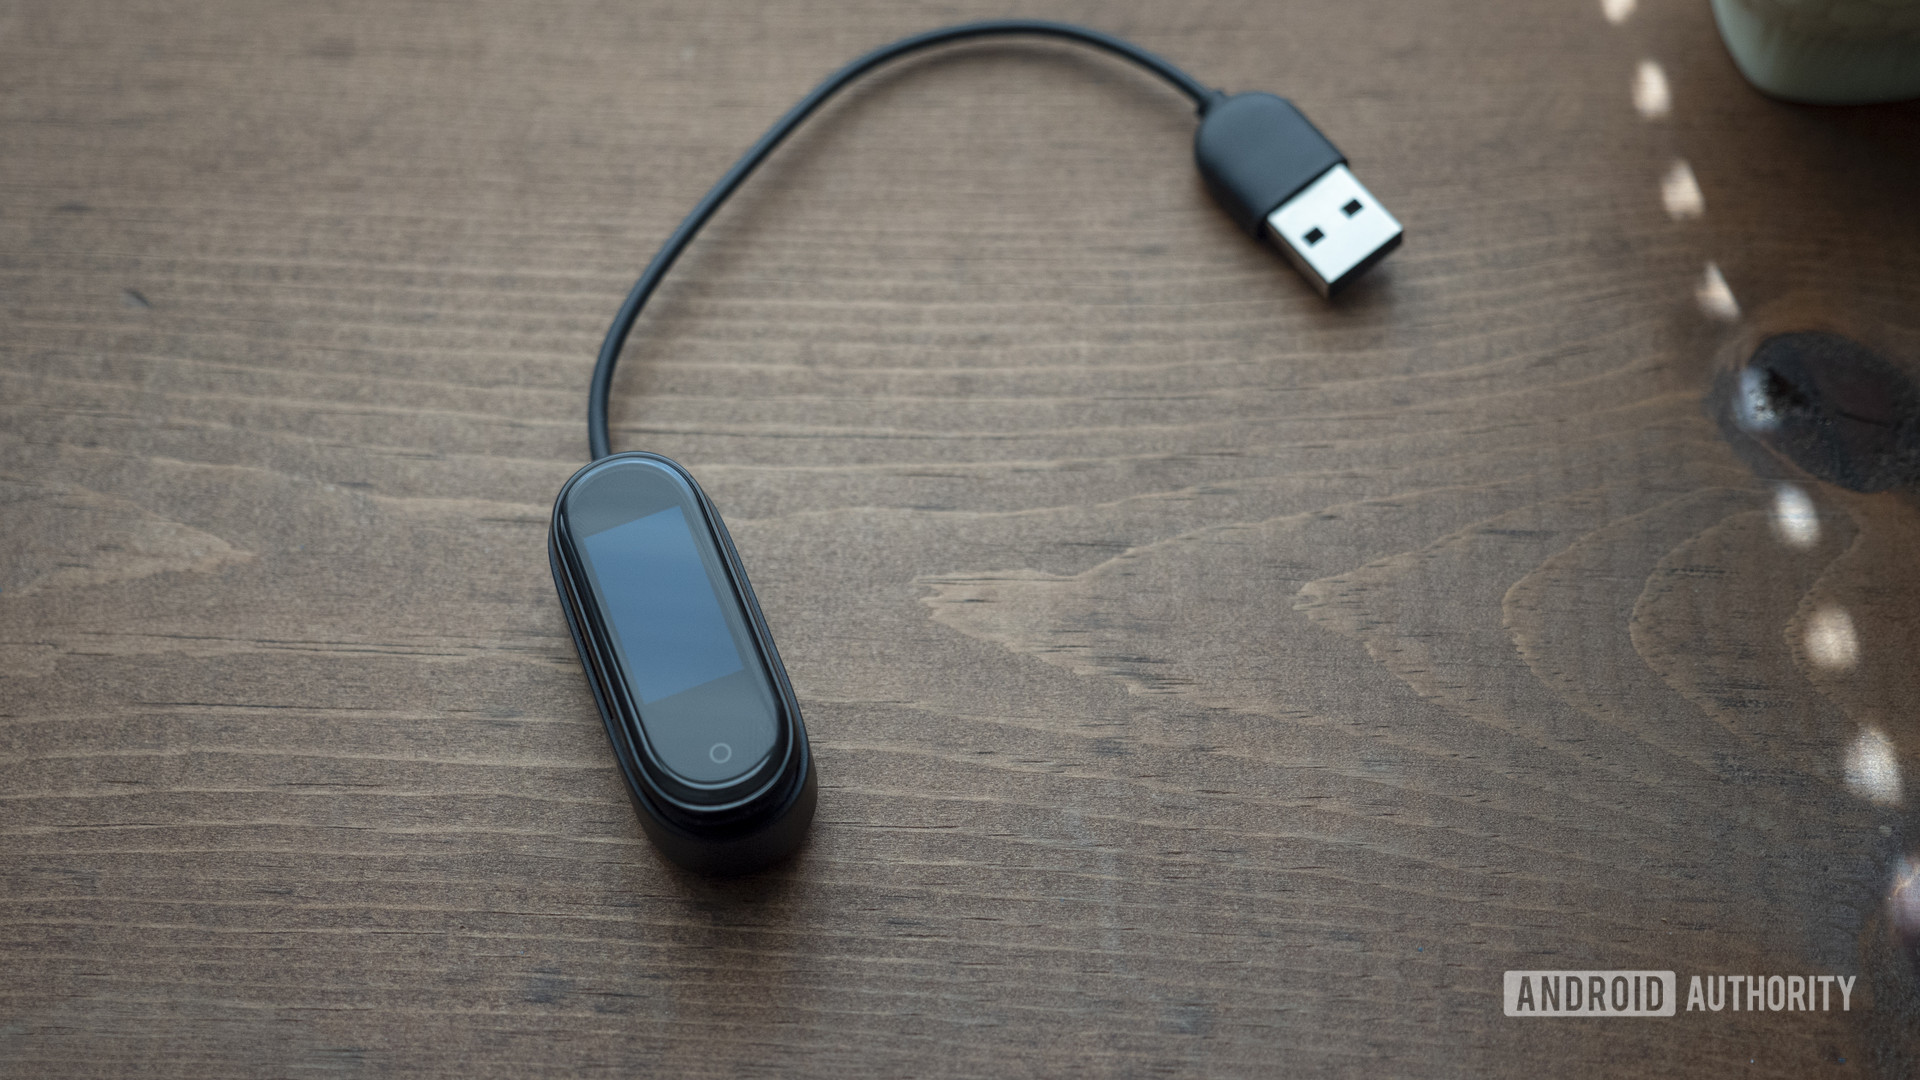 xiaomi mi band 4 review on charger charging cable bad not good